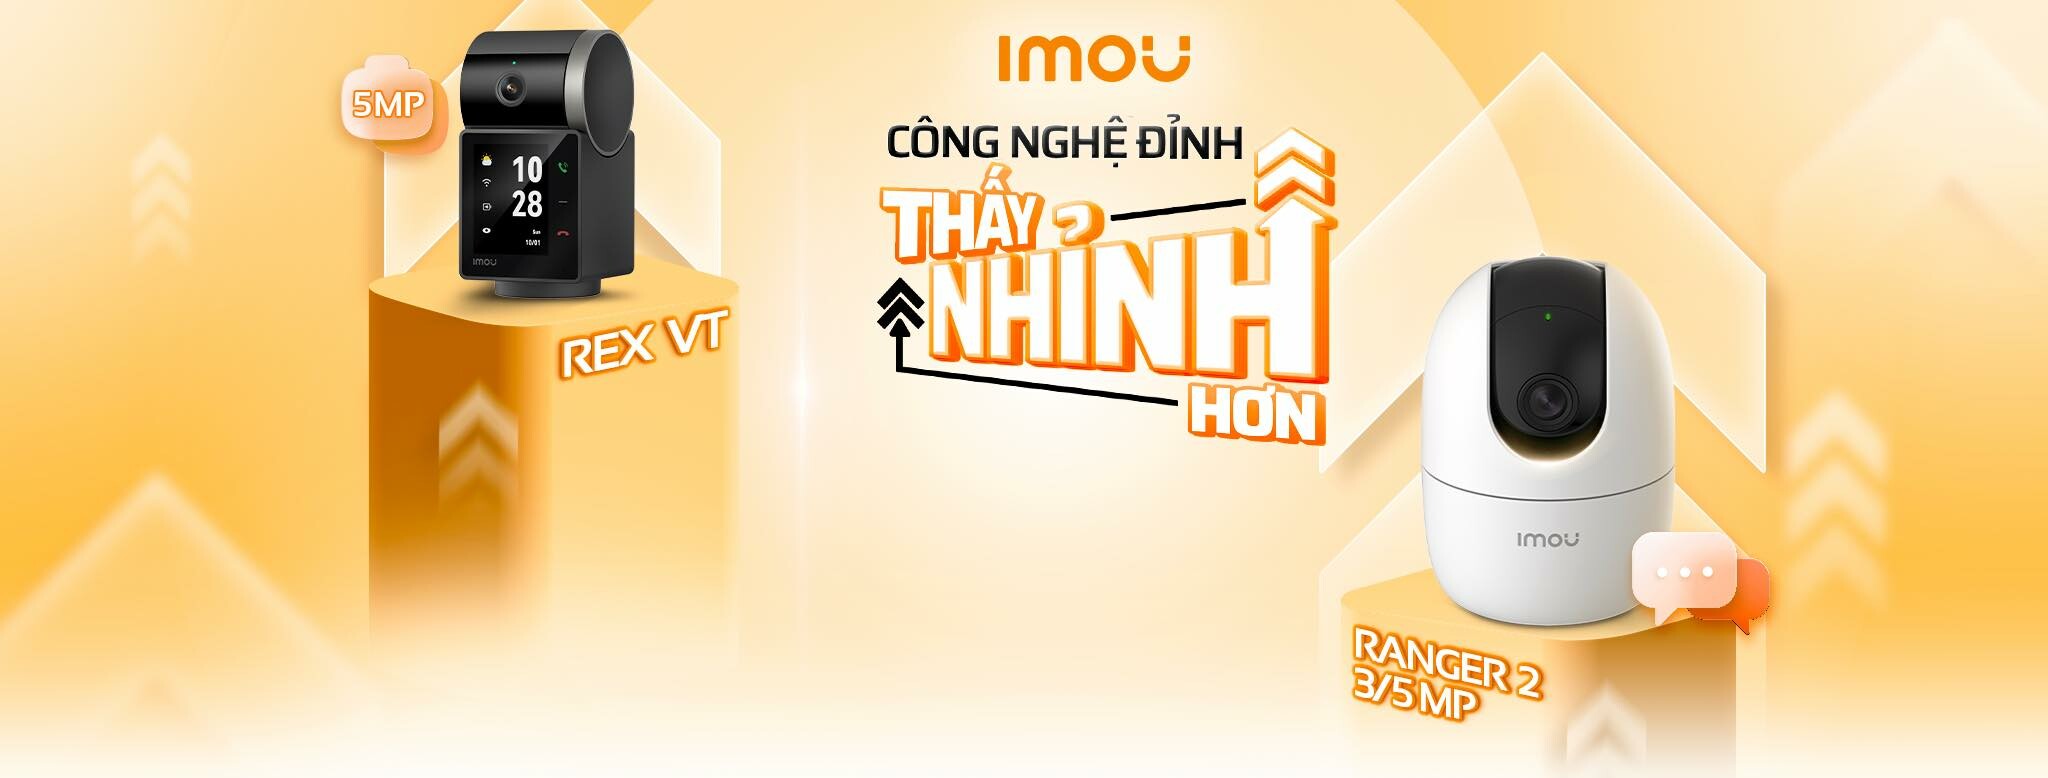 Cover image for CÔNG NGHỆ IMOU NETWORK VIỆT NAM